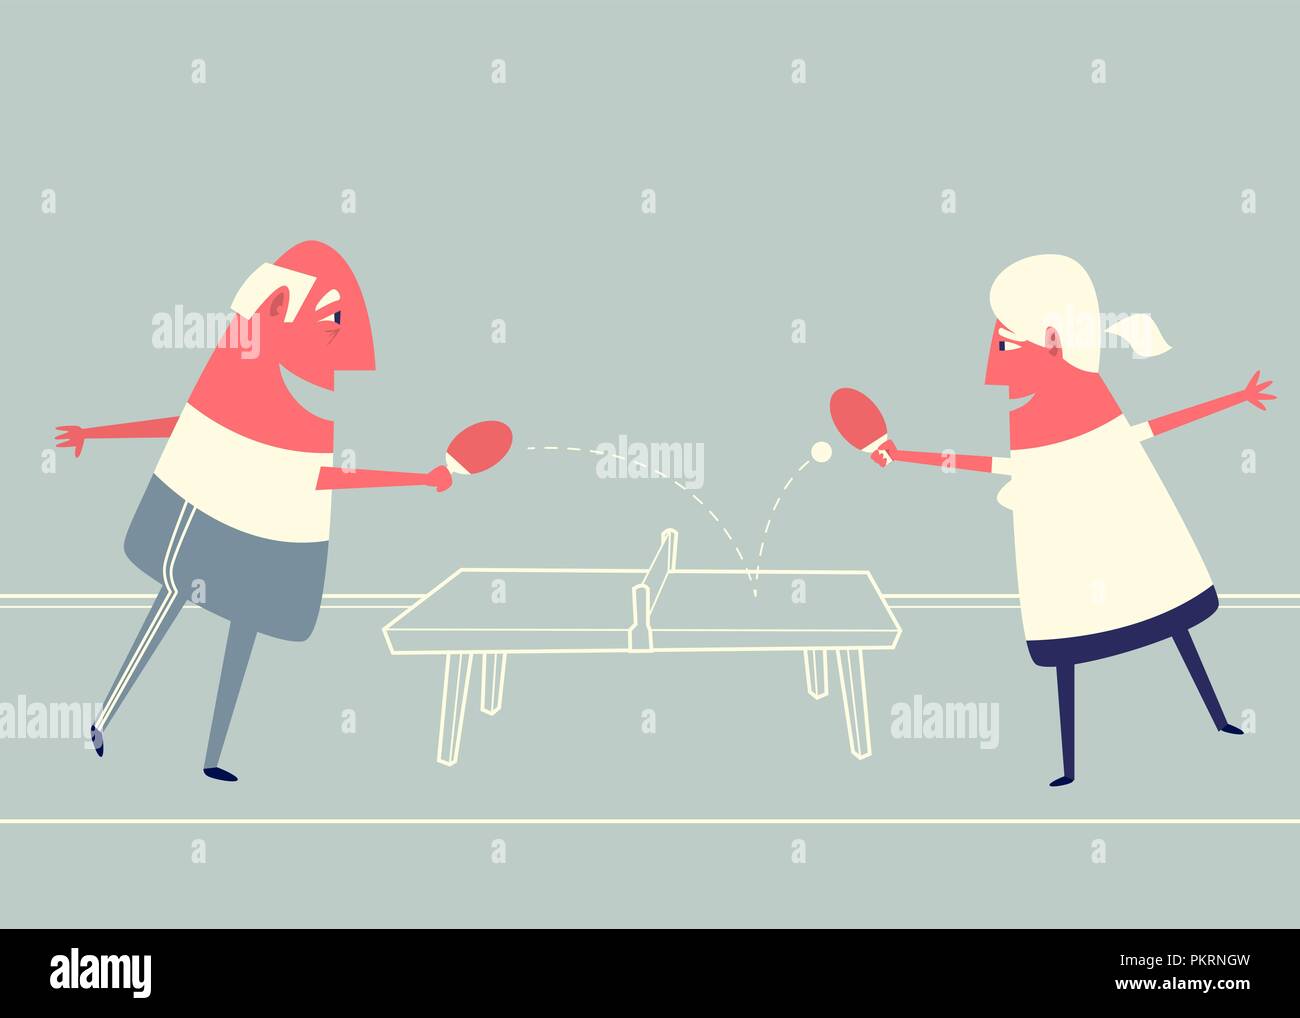 Cartoon elderly couple playing ping pong. Stock Vector